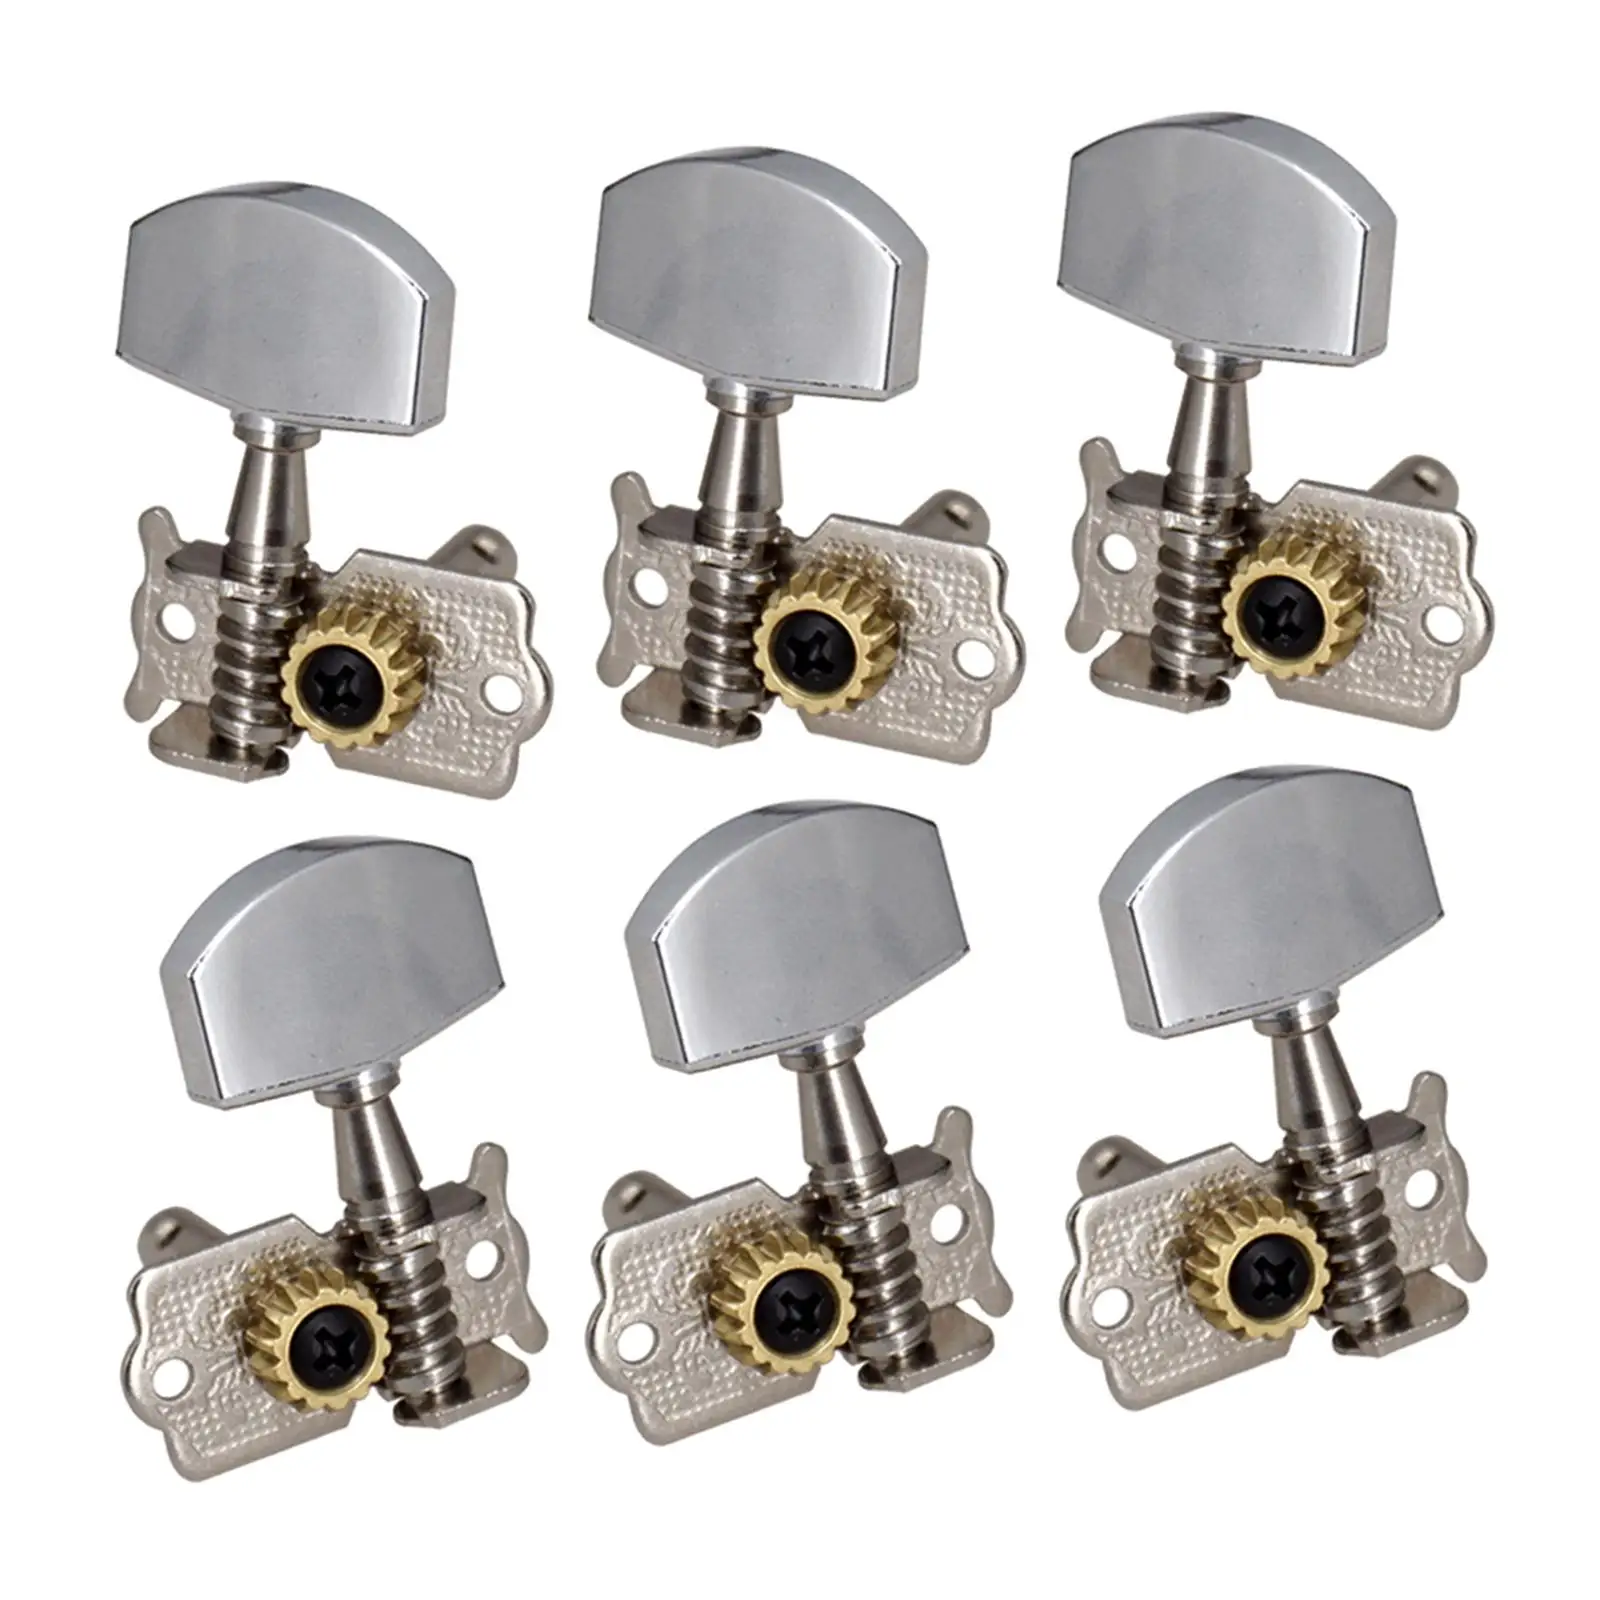 6pcs Guitar 3L 3R Open String Button Tuning Pegs Machine Head Key Peg Knobs Tuners for Acoustic Guitar Replacement Parts